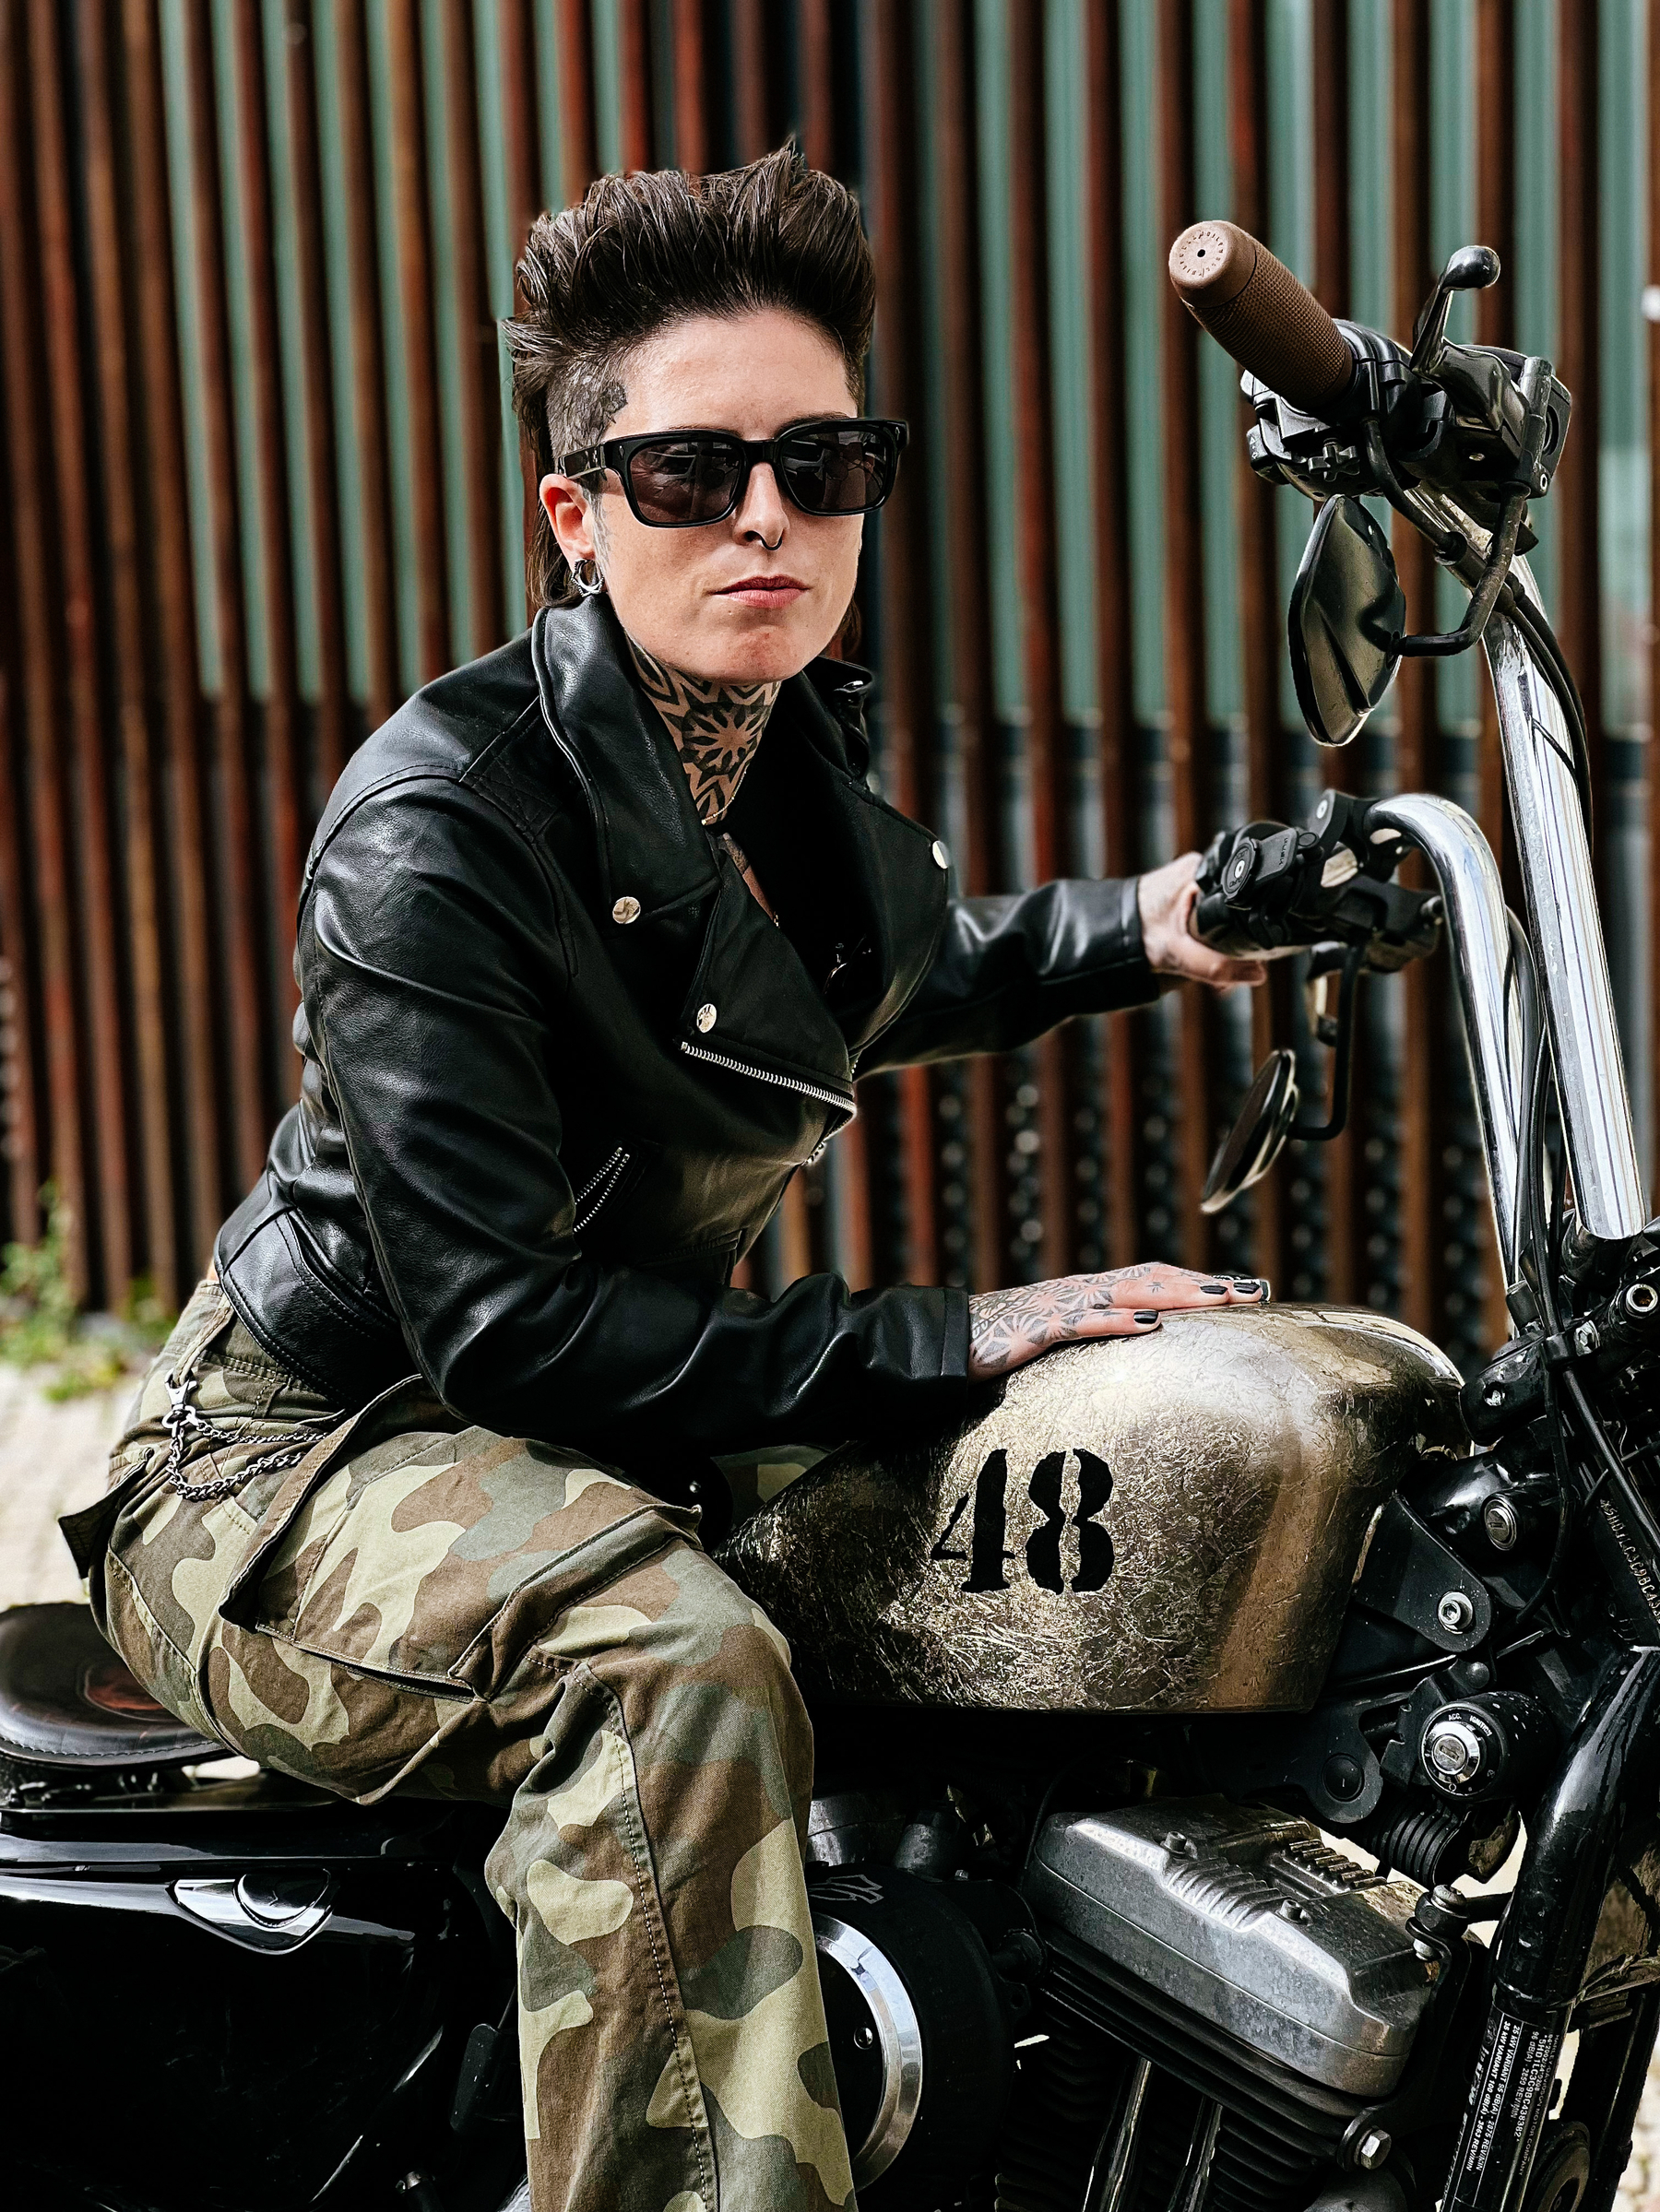 Girl wearing camo pants, leather jacket and shades sitting on a custom Harley, with 48 written on the tank 